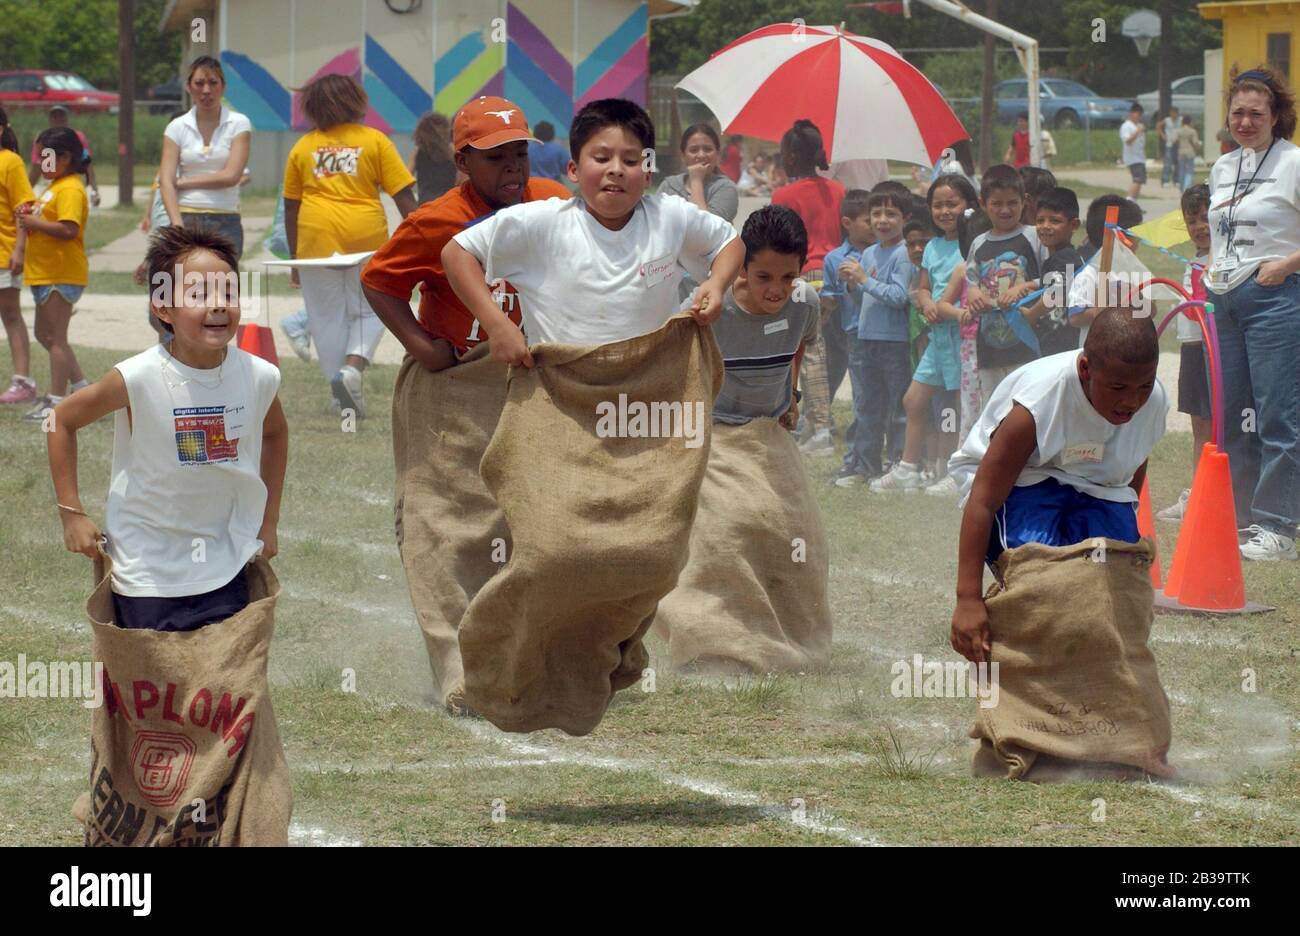 Austin Texas USA, circa 2004: Elementary school students compete in a sack race during the annual field day at Walnut Creek Elementary School. ©Bob Daemmrich Stock Photo